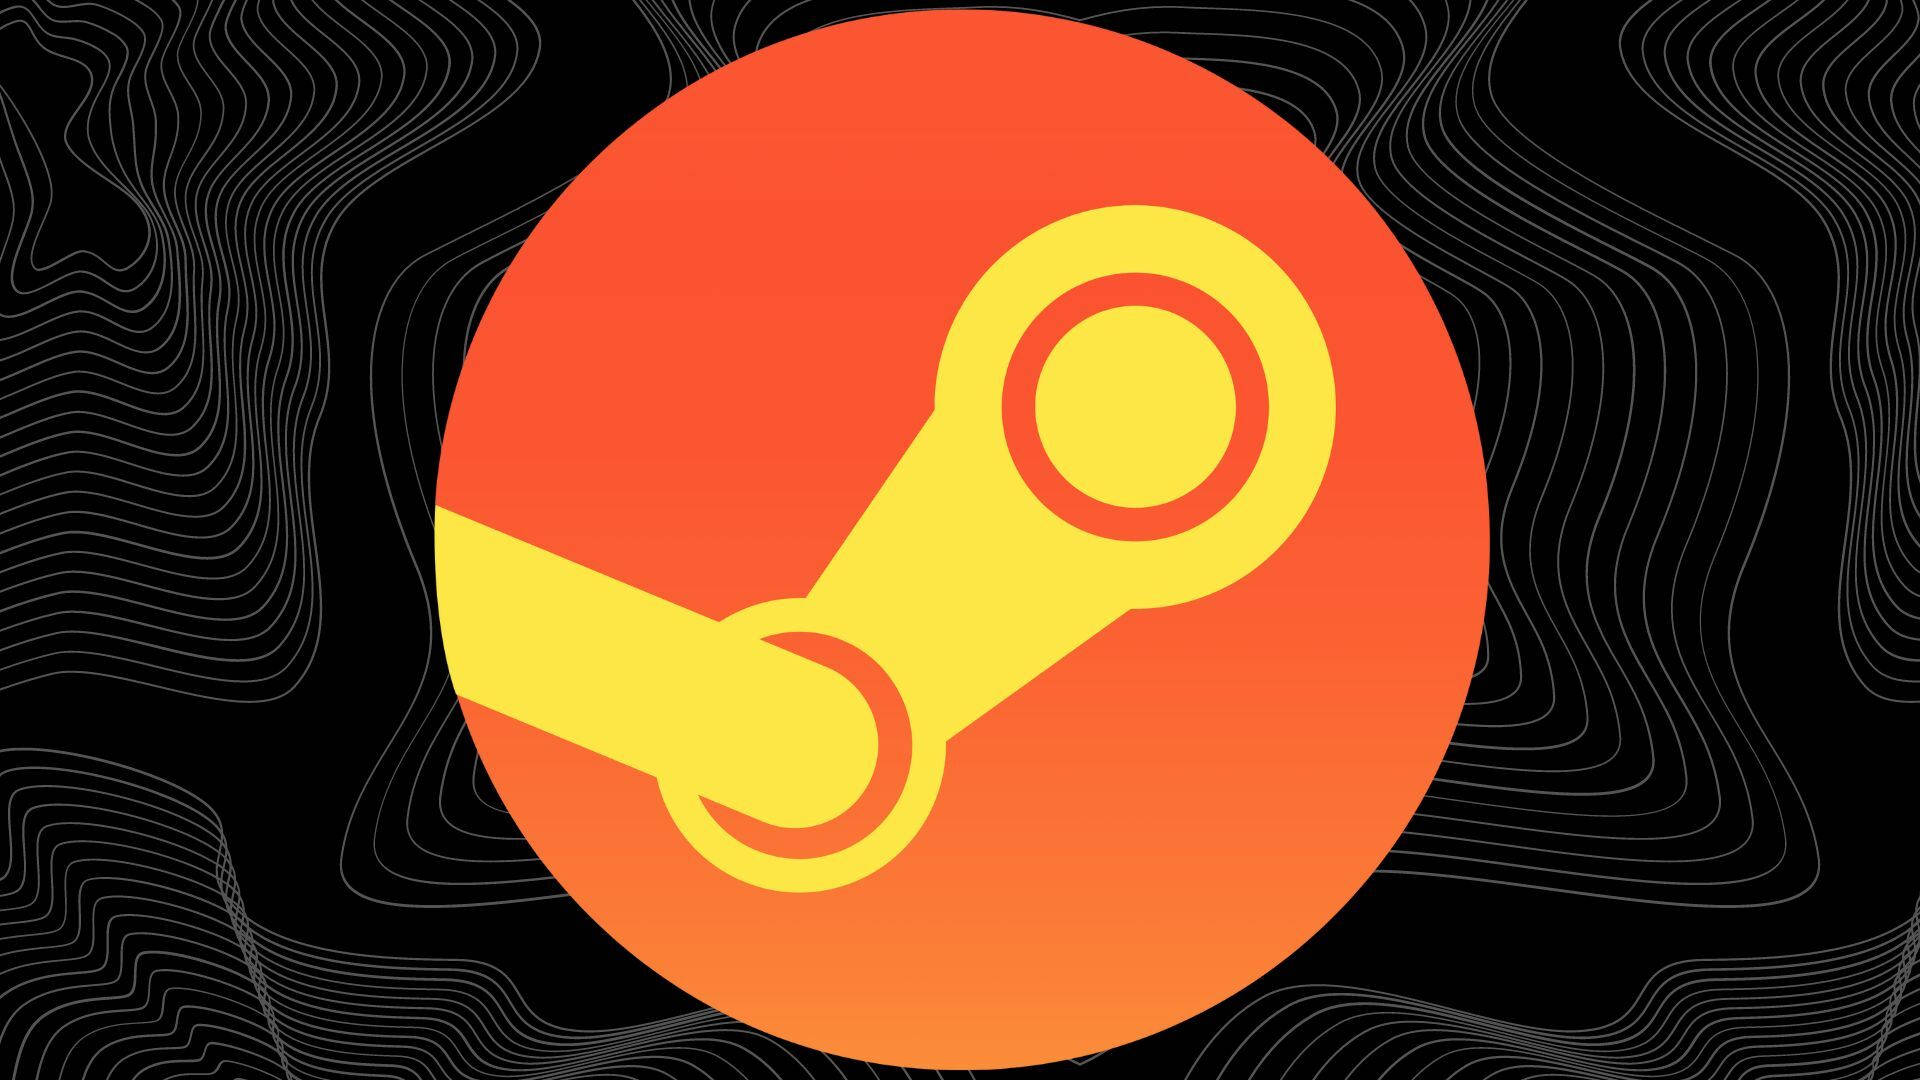 Free Steam keys and how to redeem